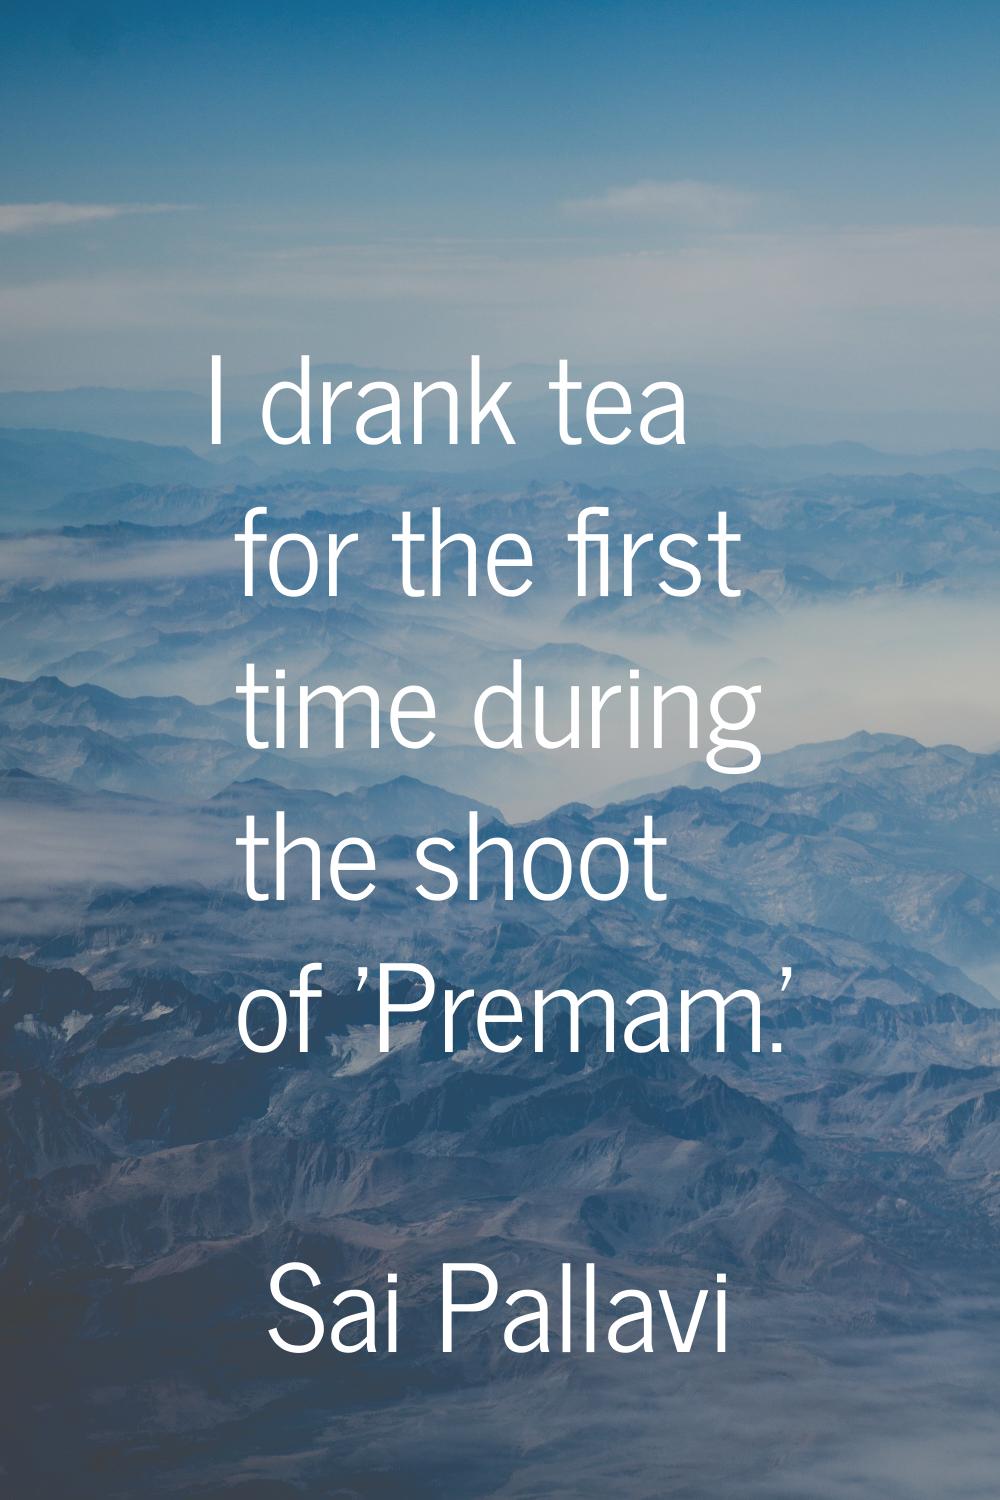 I drank tea for the first time during the shoot of 'Premam.'